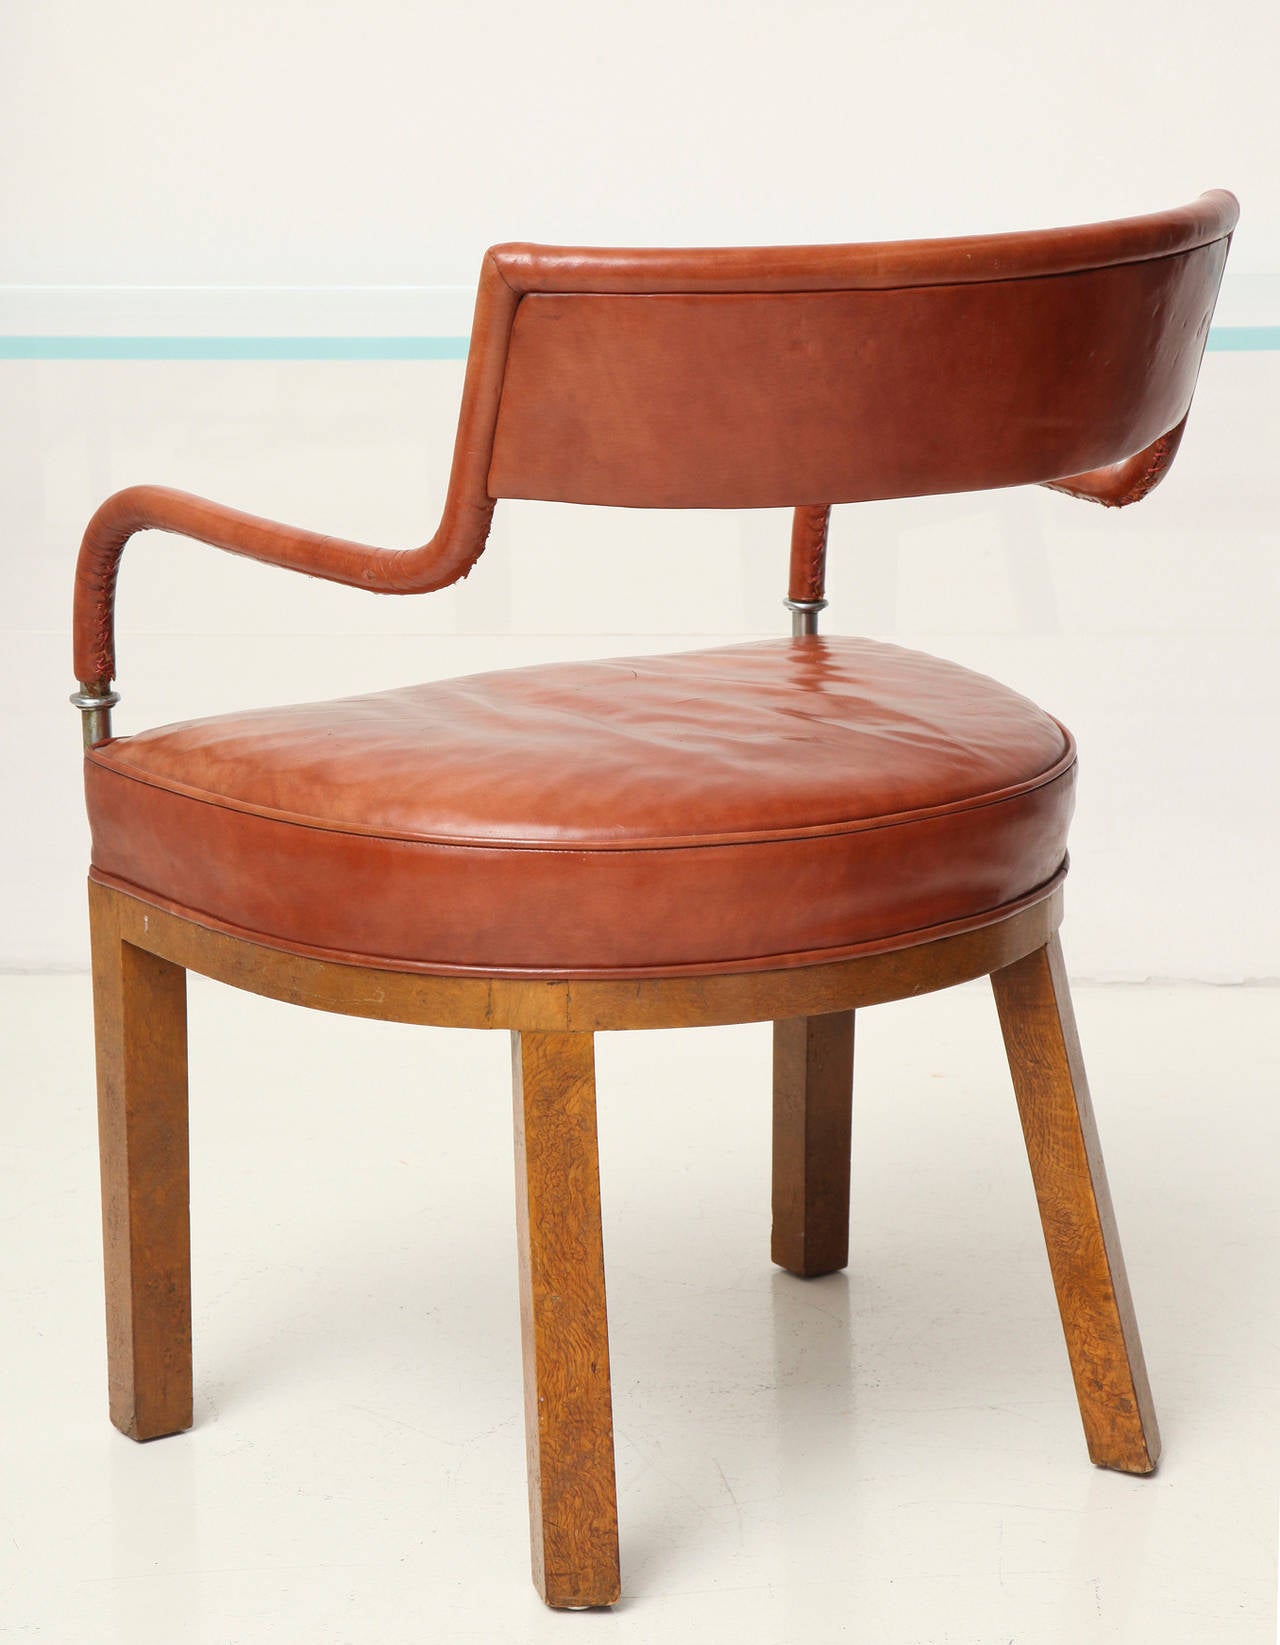 SAMUEL MARX (1885-1964)
Armchair with cantilevered back in fine-grained caramel-colored leather on seat and back and leather-wrapped nickel arms, raised on burlwood veneer-clad square legs.
Executed by Quigley.
American, c.